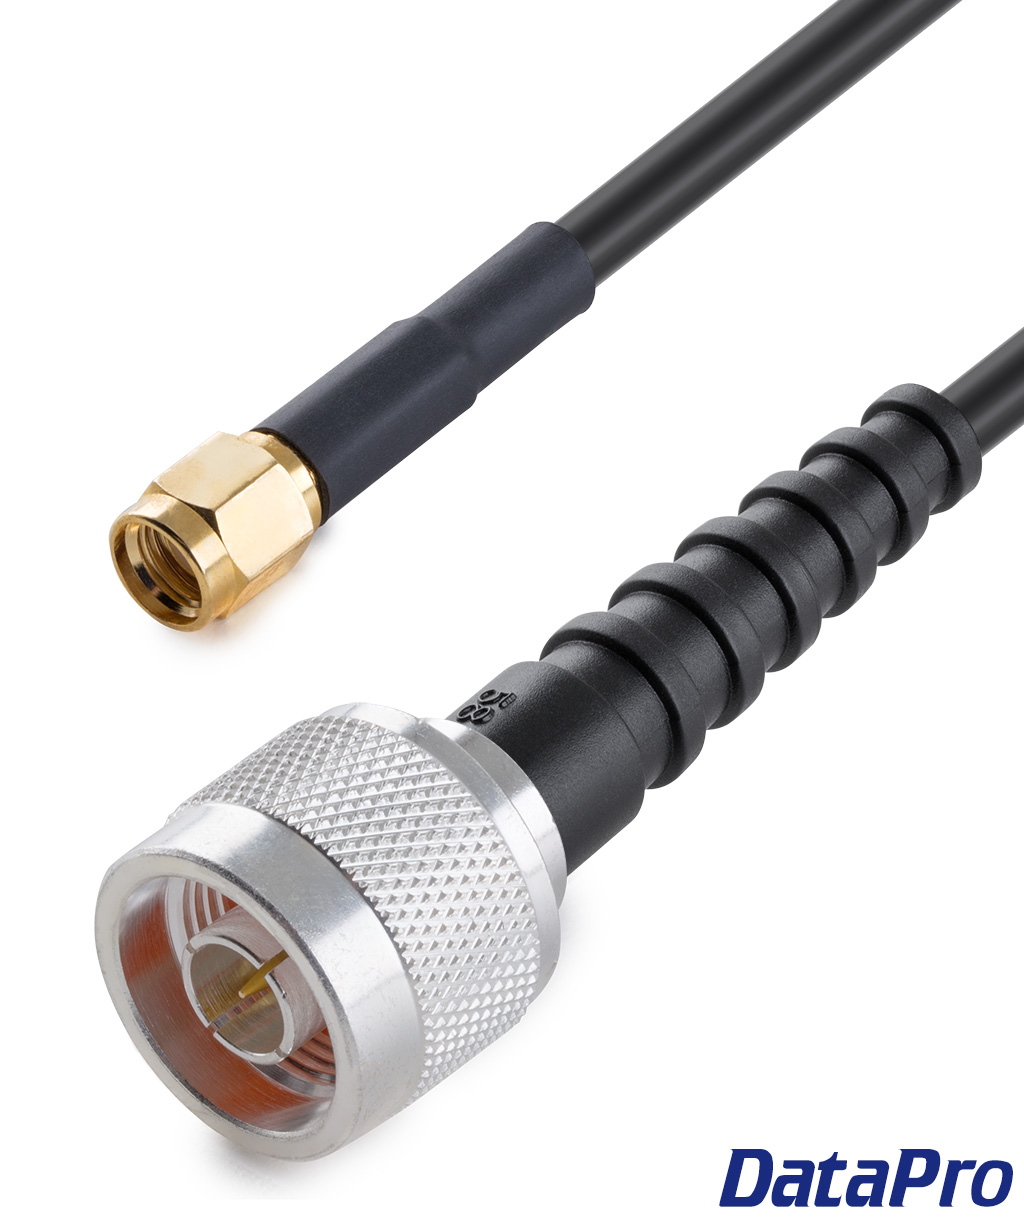 RP-SMA to N Male antenna extension cable 5m 16' low loss for Alfa Wi-Fi antenna 